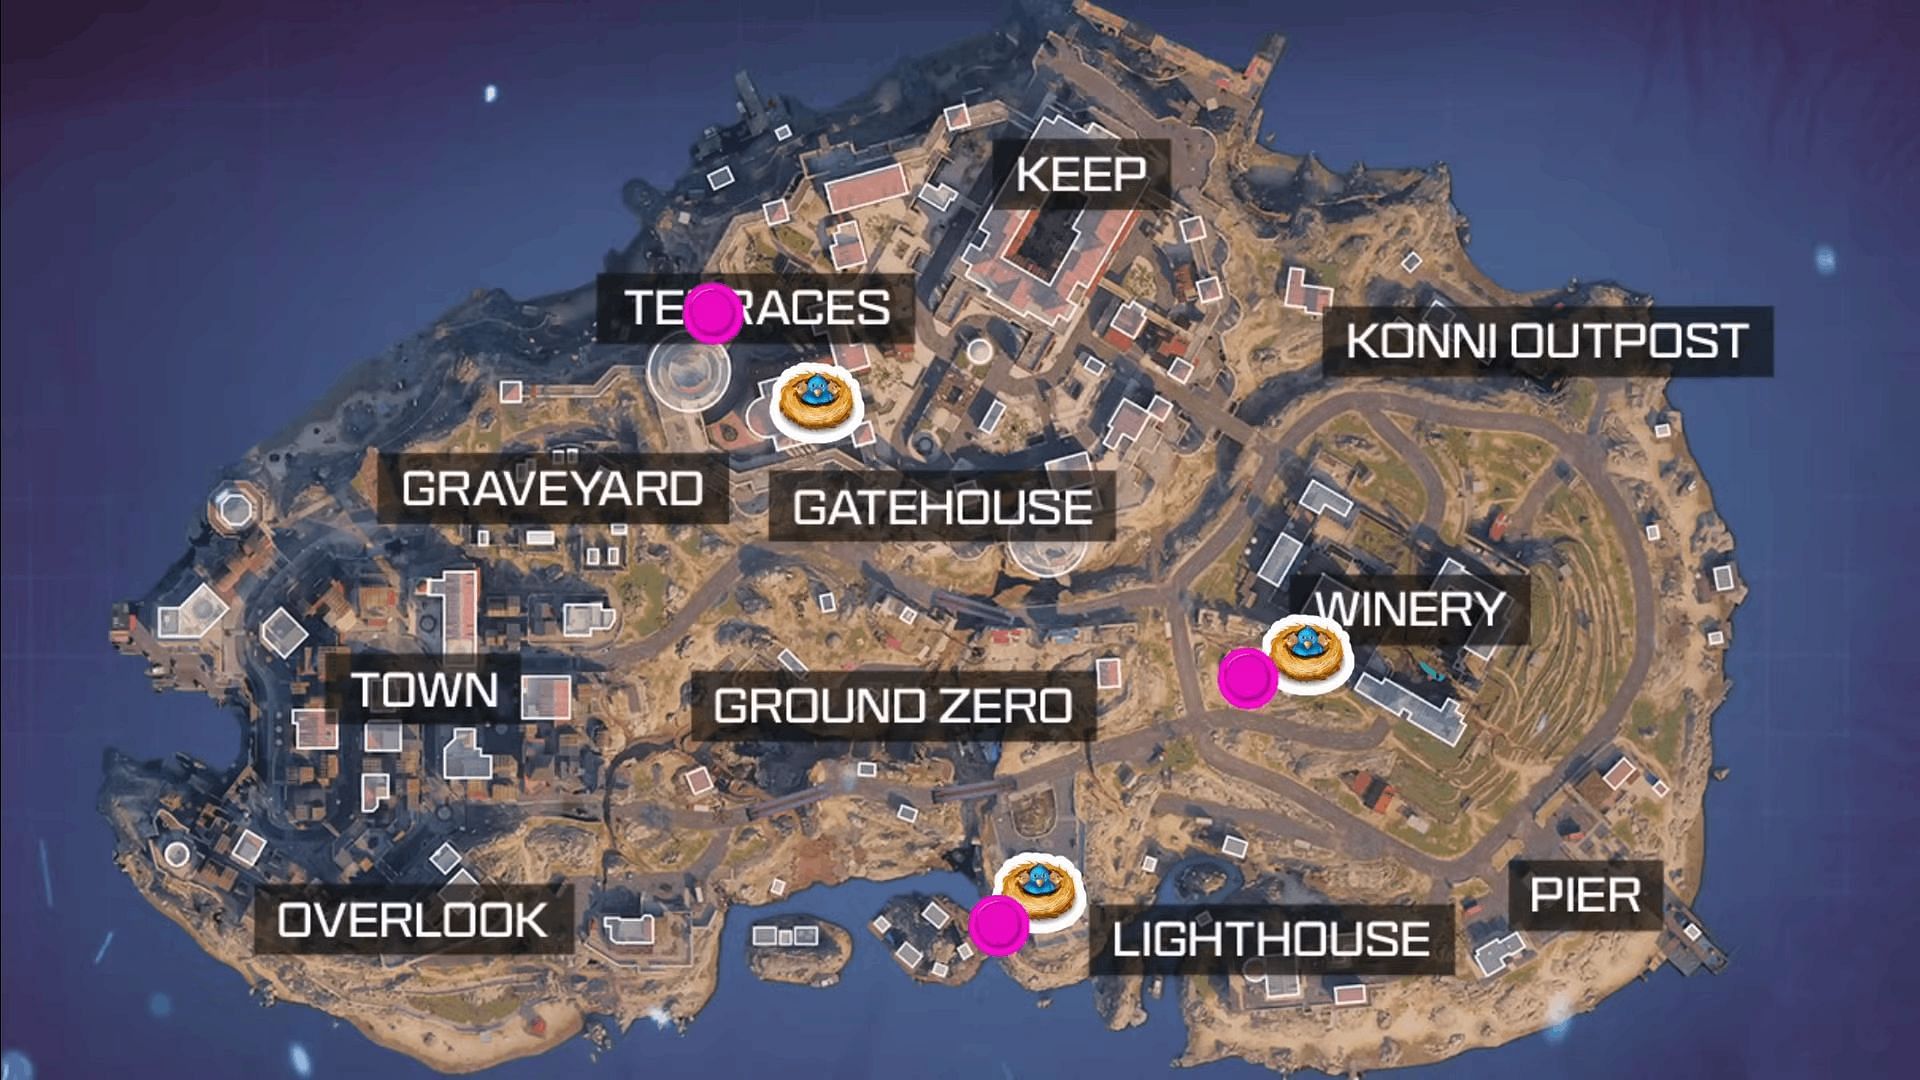 Sightseeing binoculars location for Dragon Stirs easter egg (Image via YouTube/Geeky Pastimes)